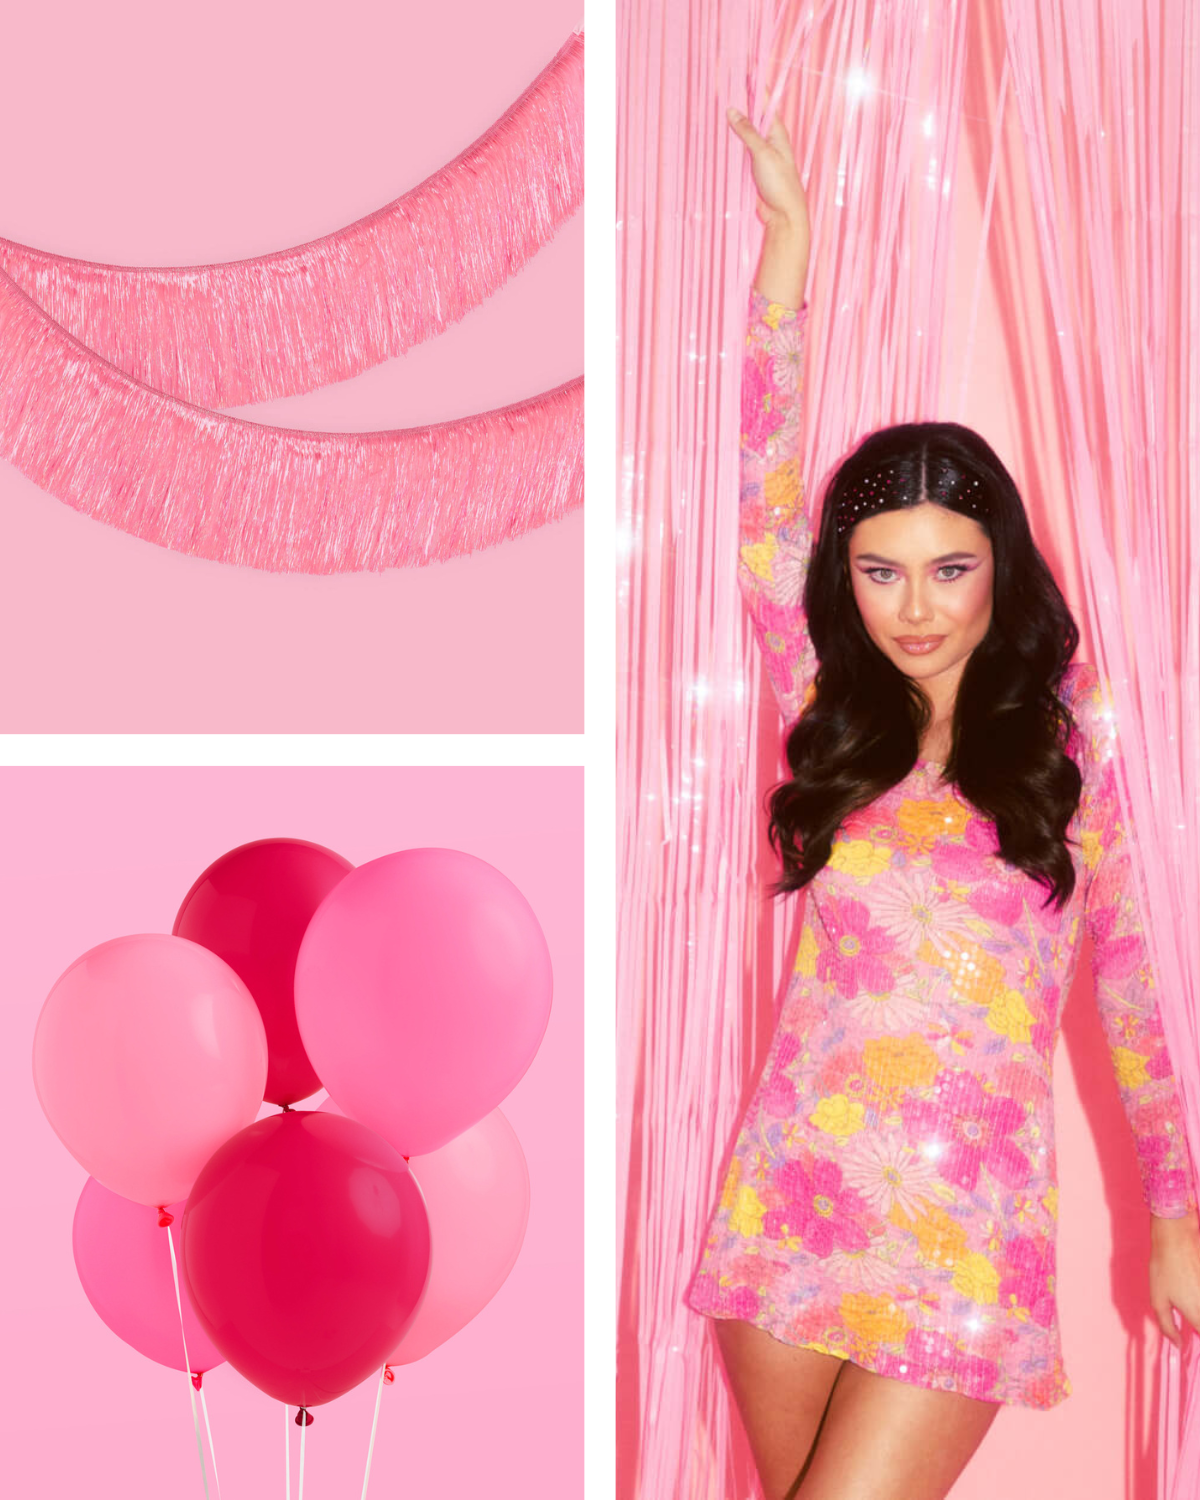 Legally Pink Pack - balloons, banners + more